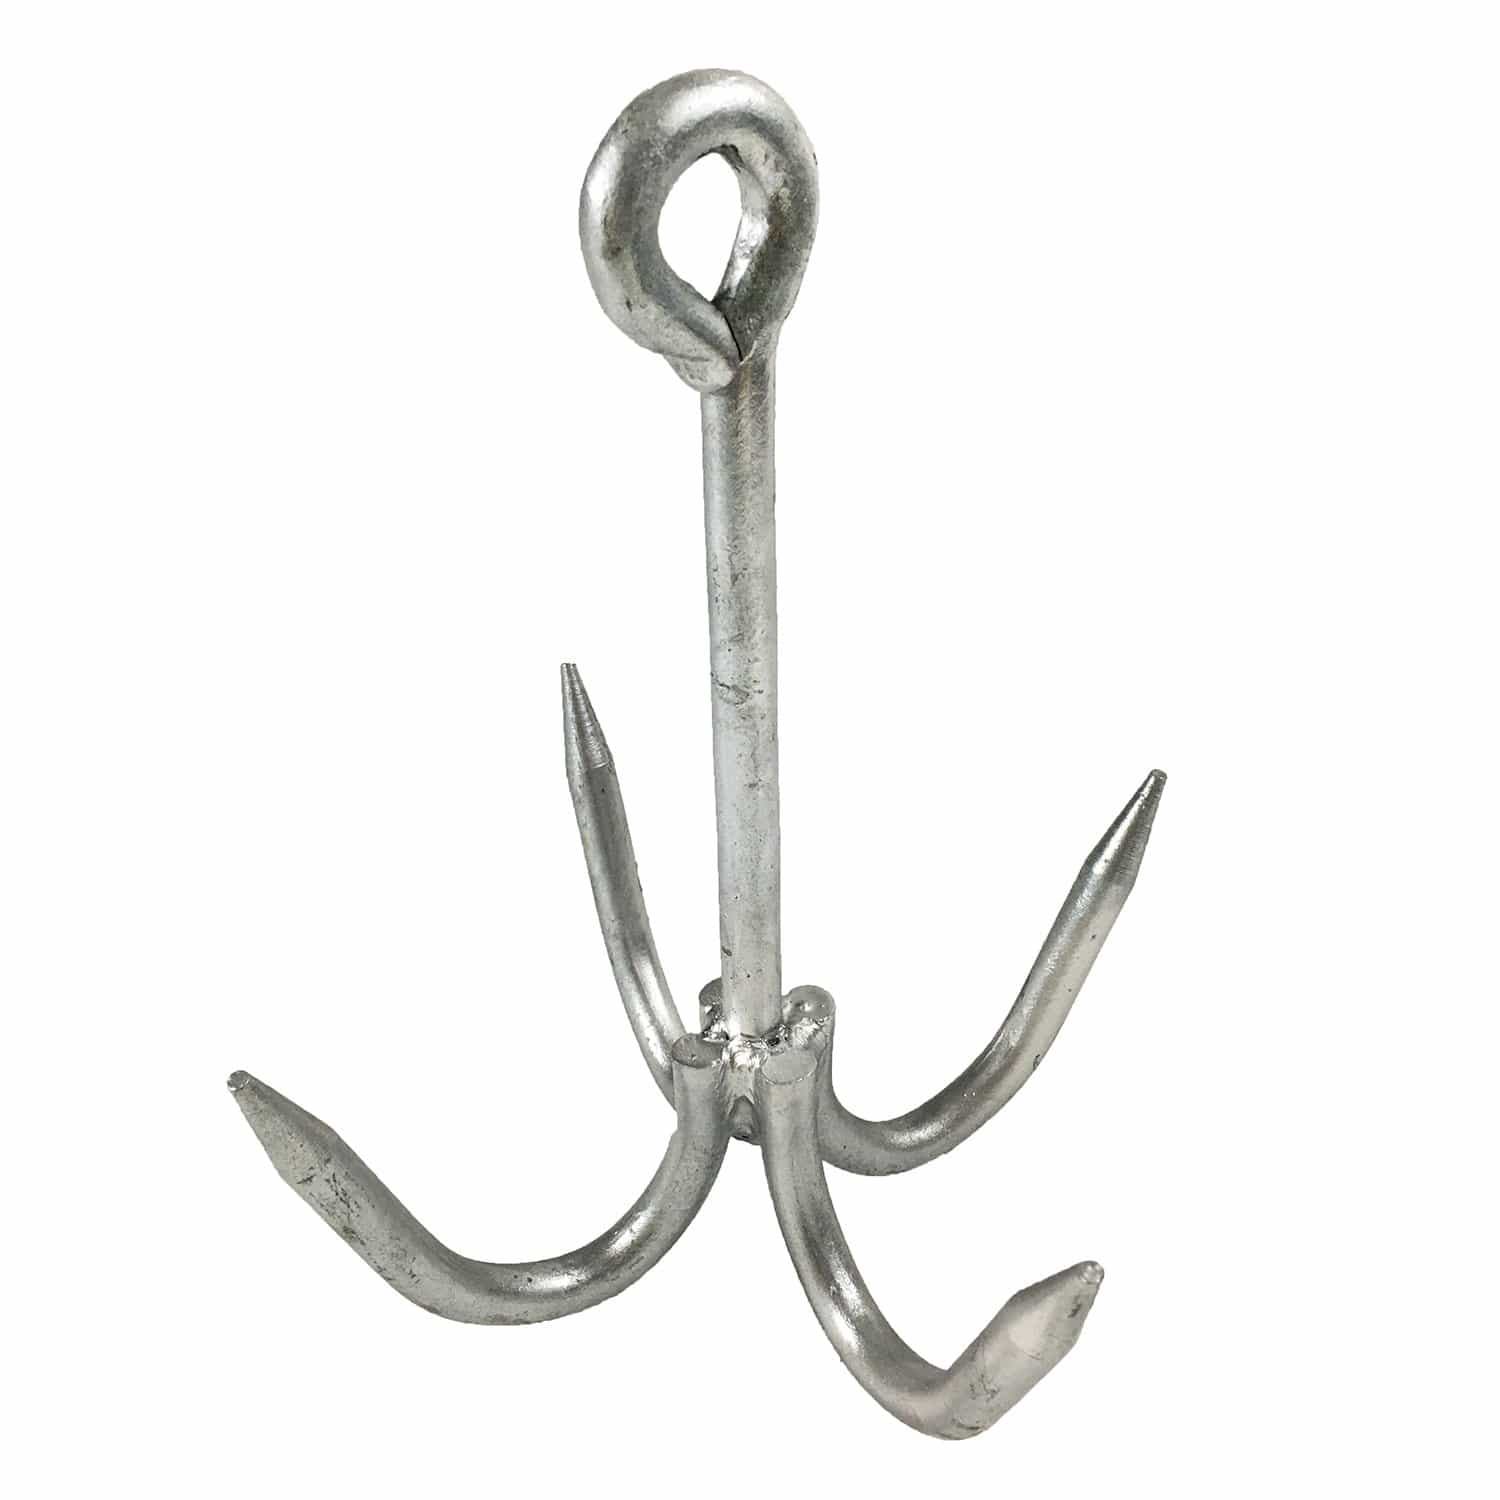 Greenfield Products GB-G Galvanized Steel Grappling Hook Kit